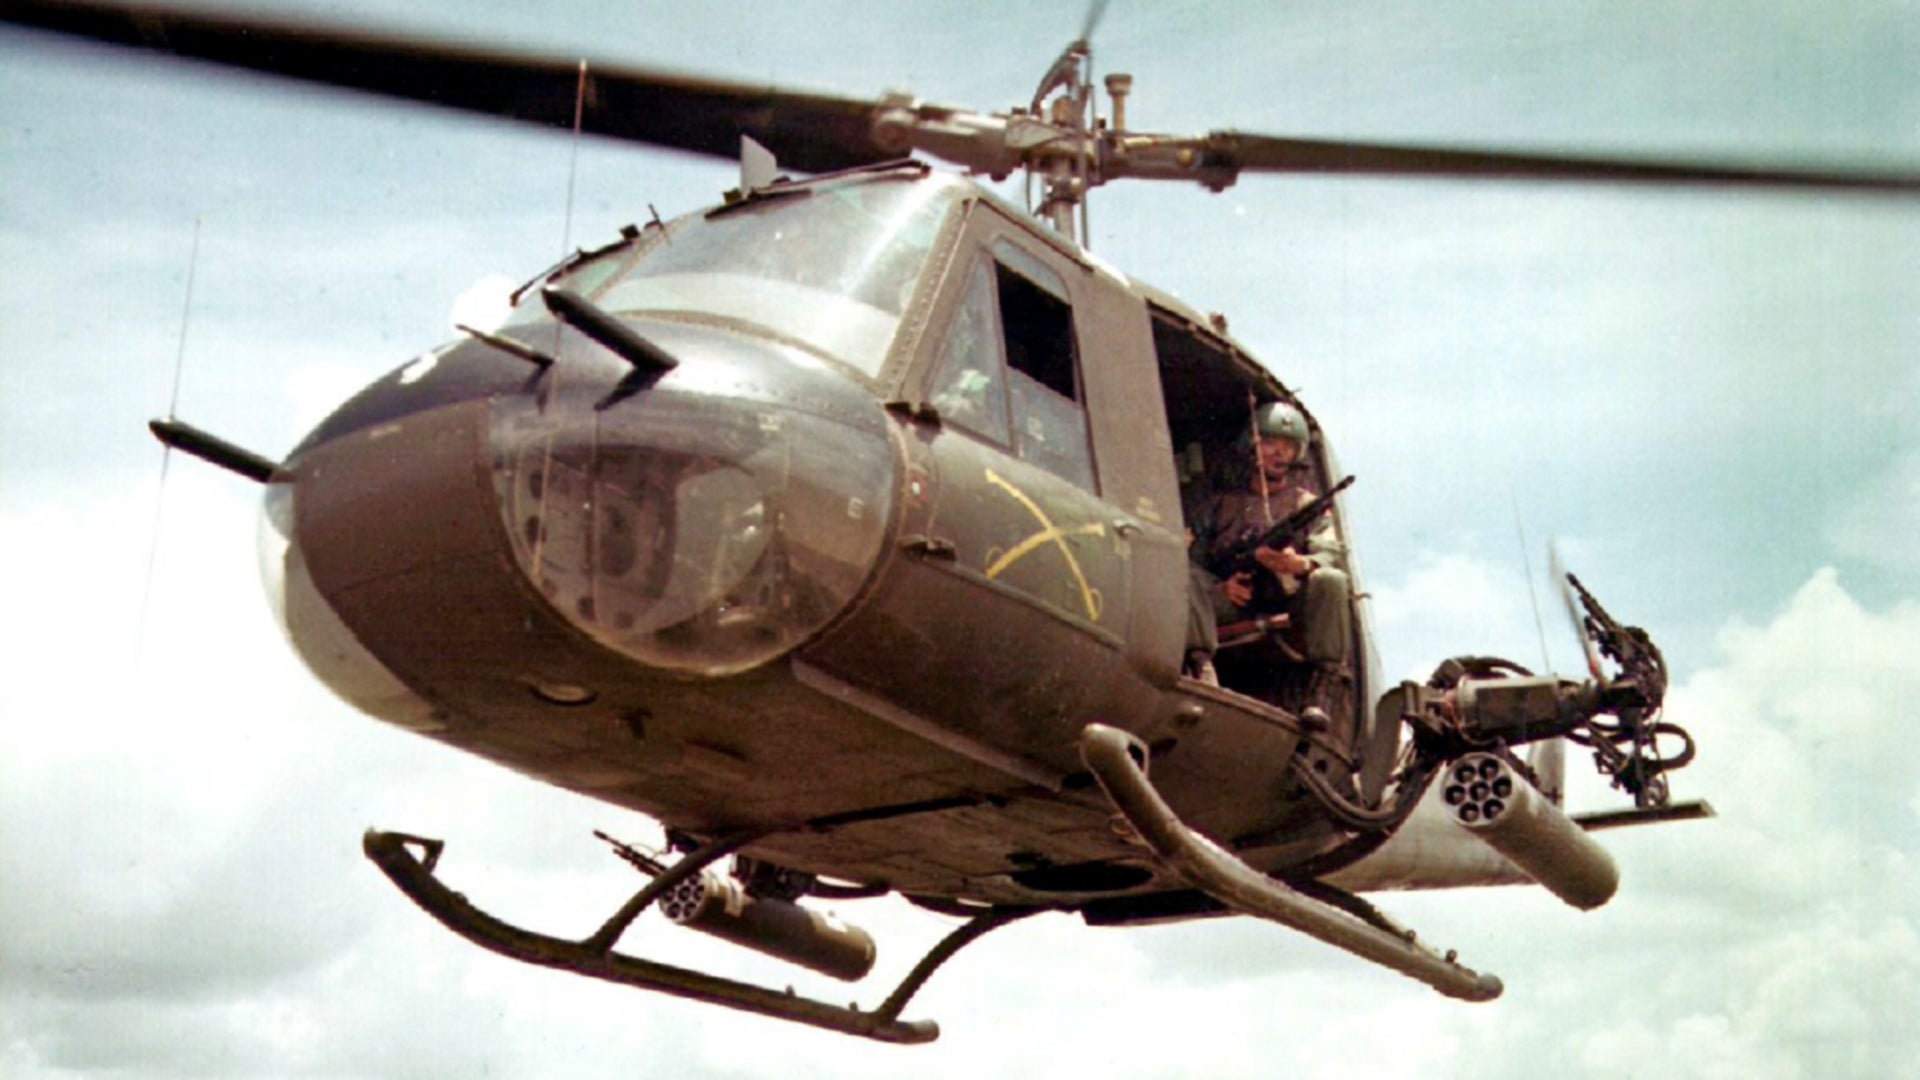 During the Vietnam War, the U.S. Army Turned Hueys Into “Mad Bombers”